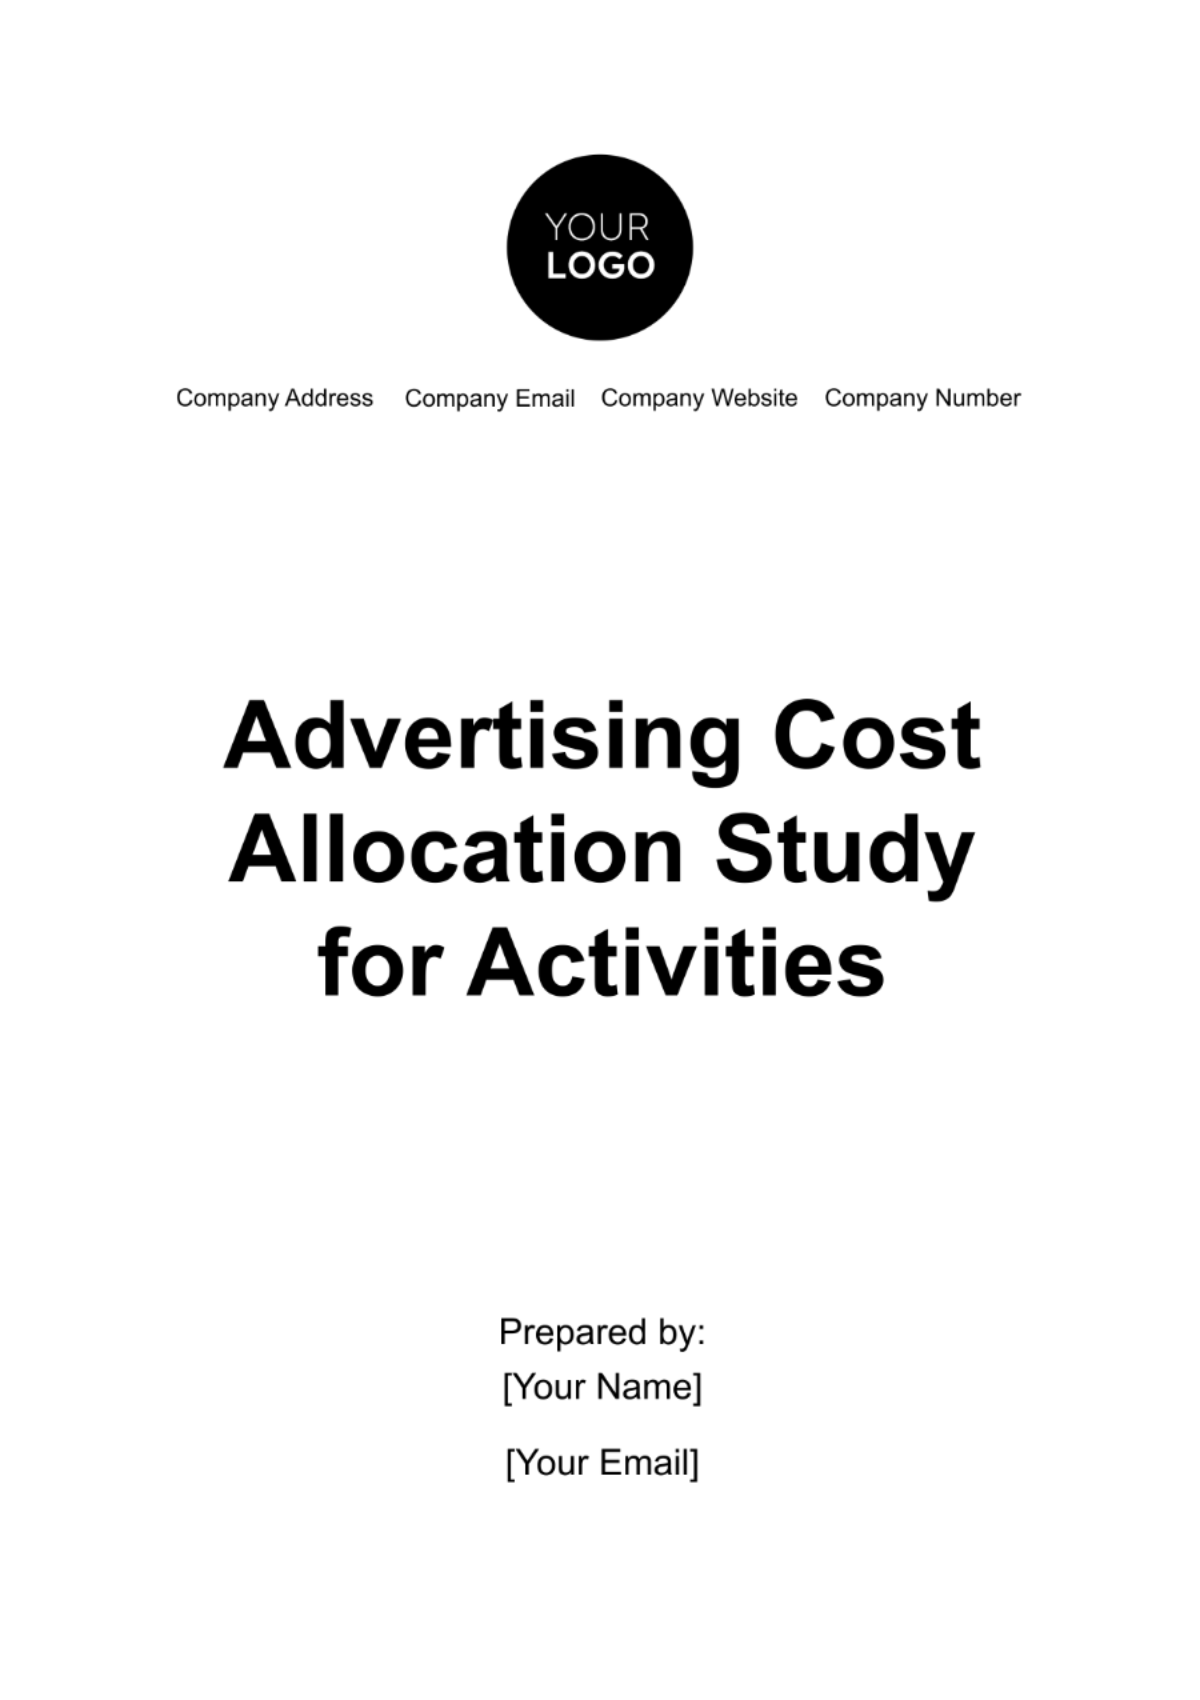 Free Advertising Cost Allocation Study for Activities Template